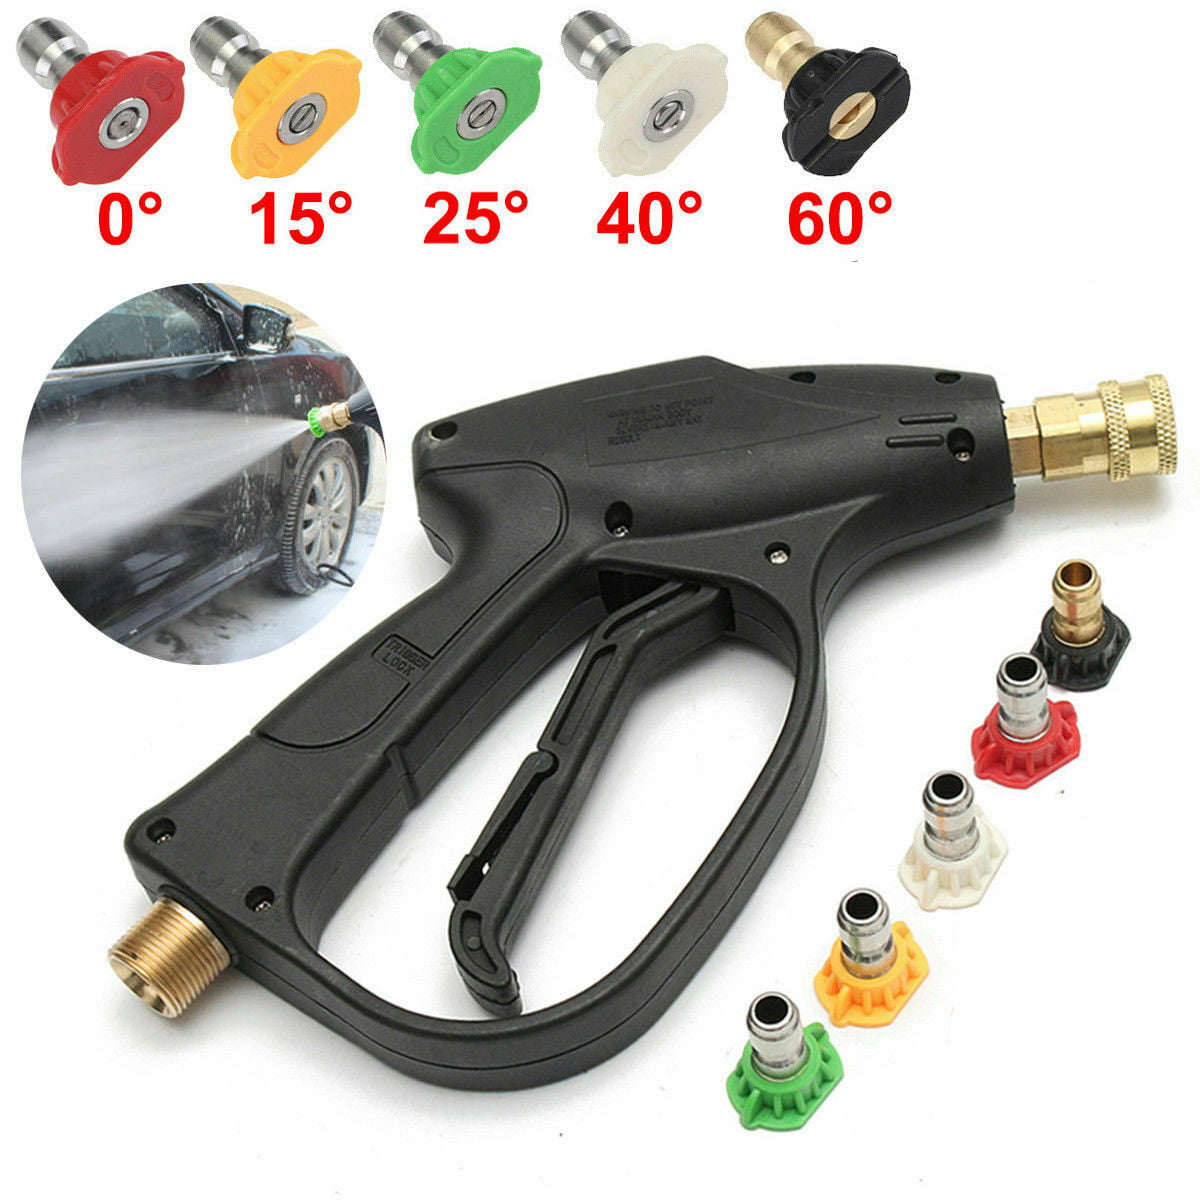 Sooprinse High Pressure Washer Gun,3000 PSI Max with 5 Color Quick Connect Nozzles M22 Hose Connector 3.0 TIP